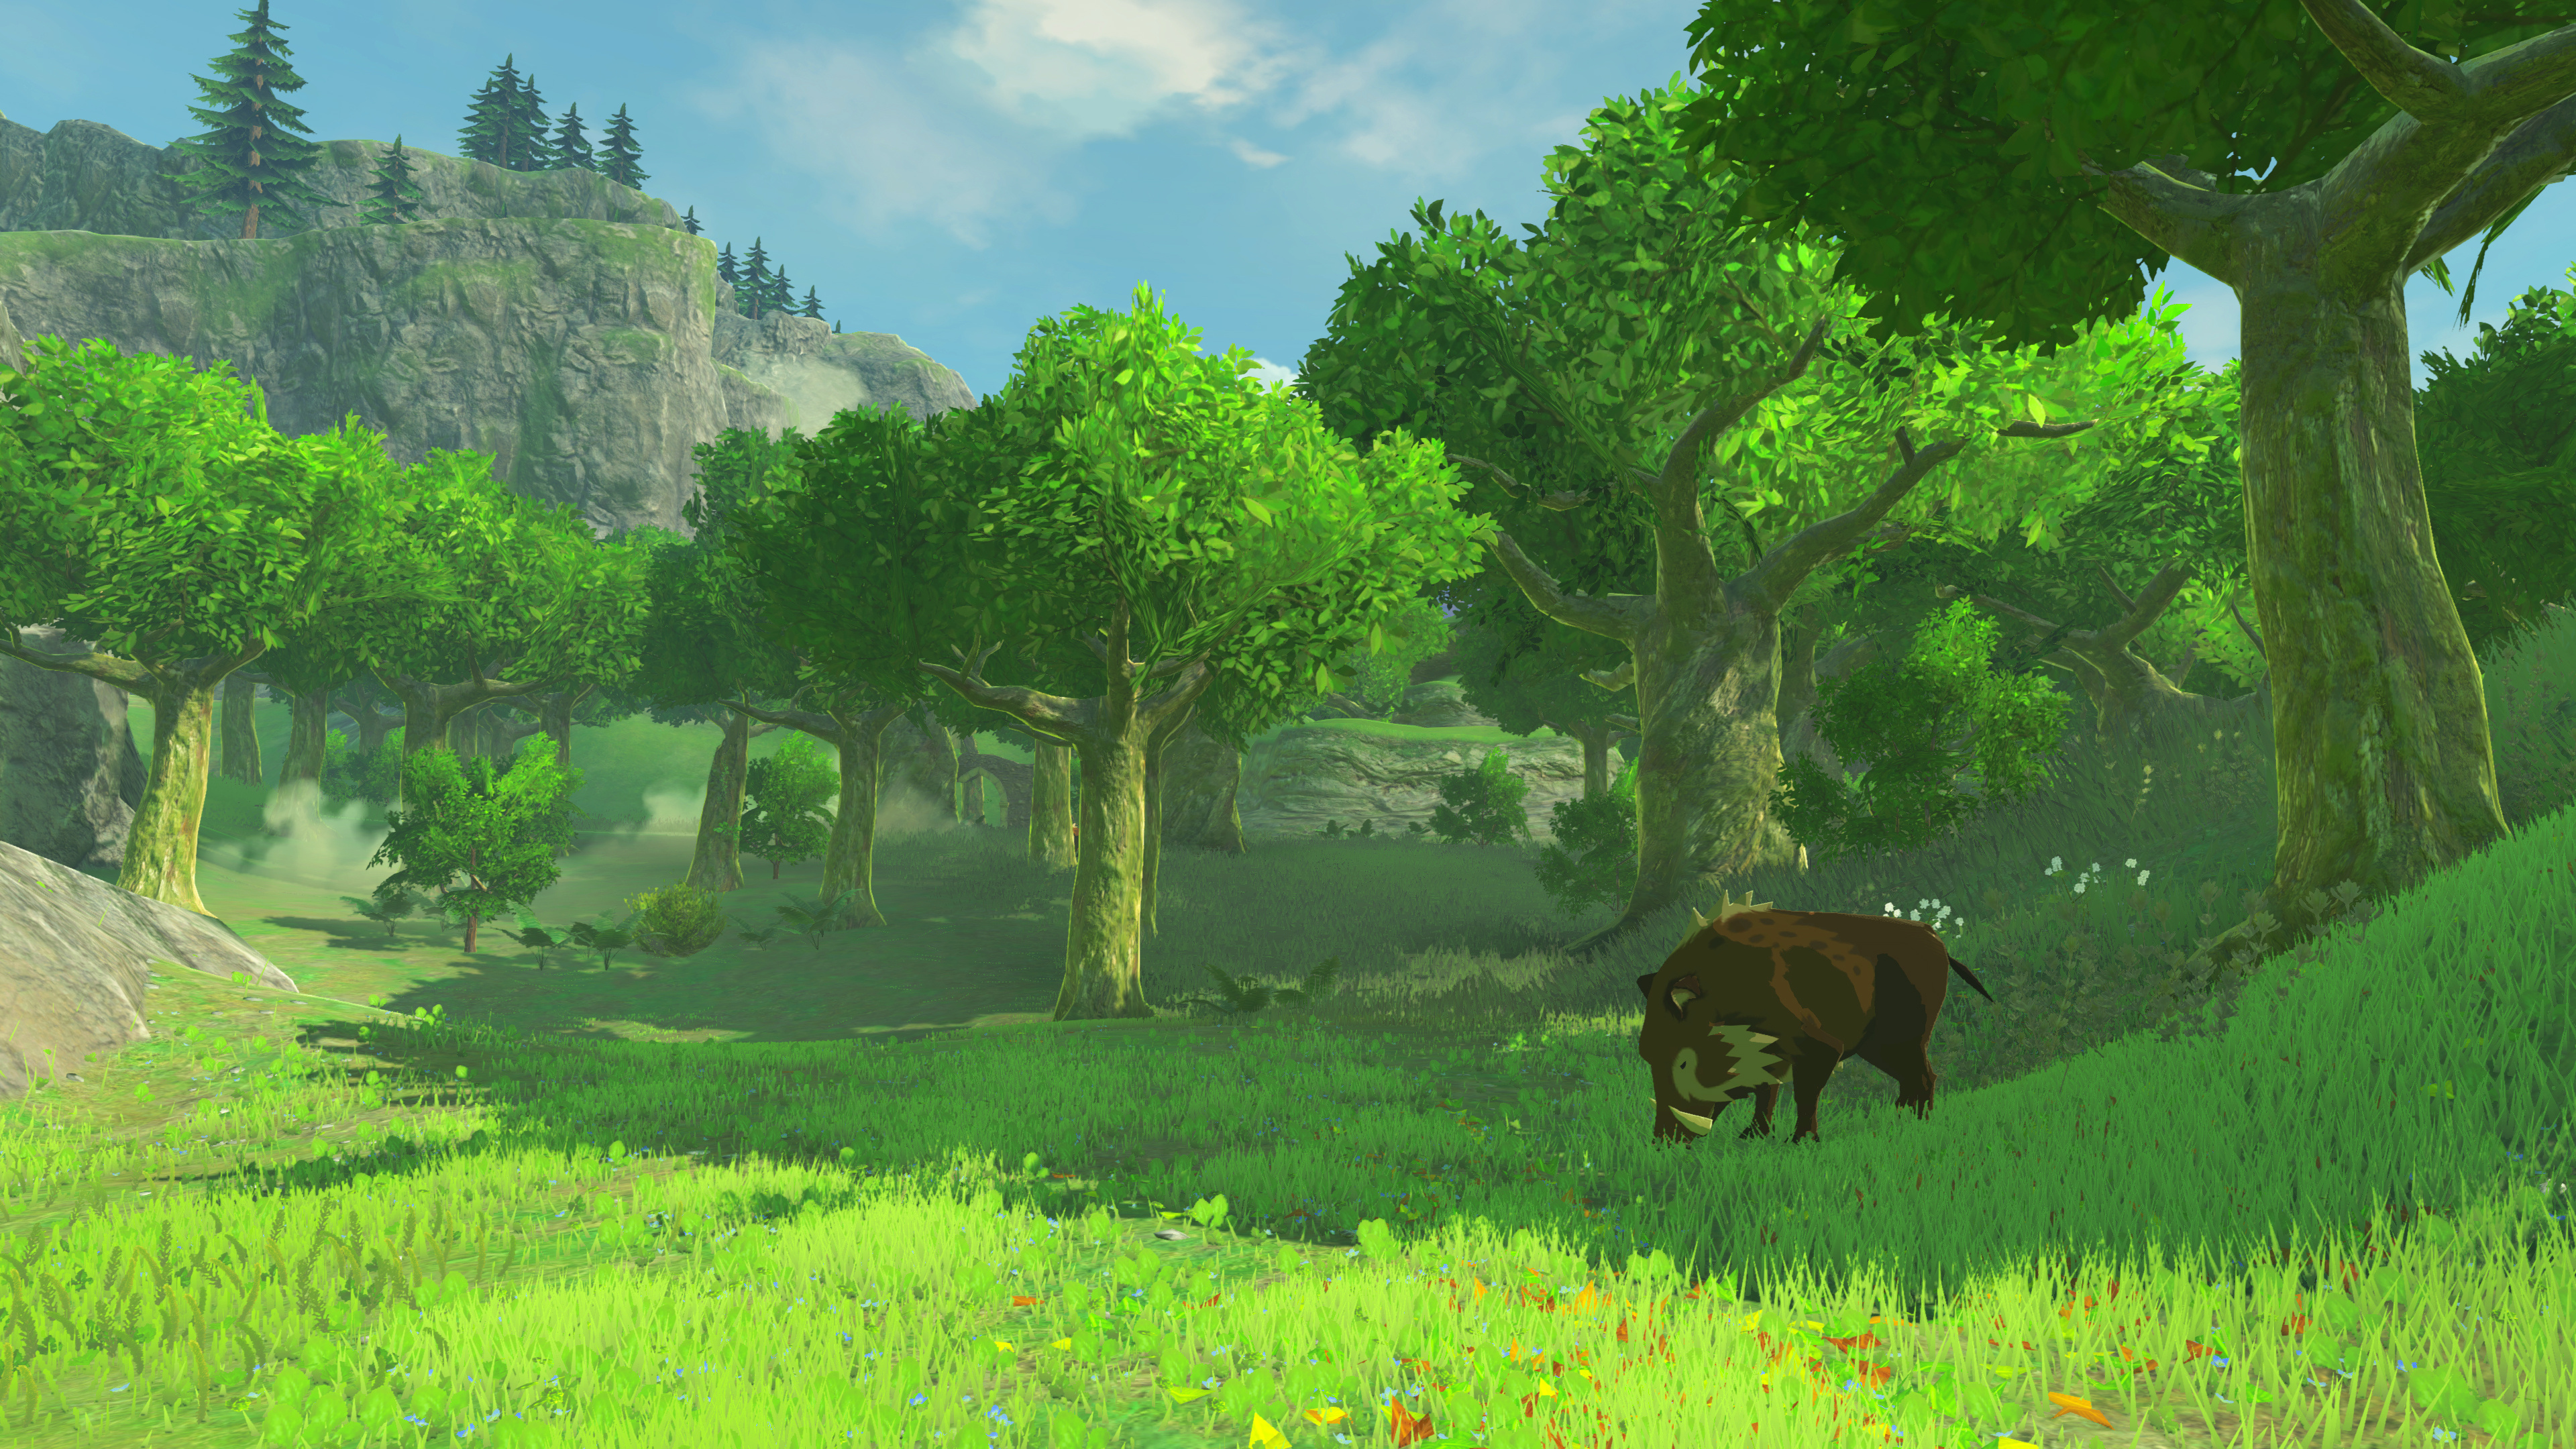 Video Game The Legend of Zelda: Breath of the Wild HD Wallpaper | Background Image